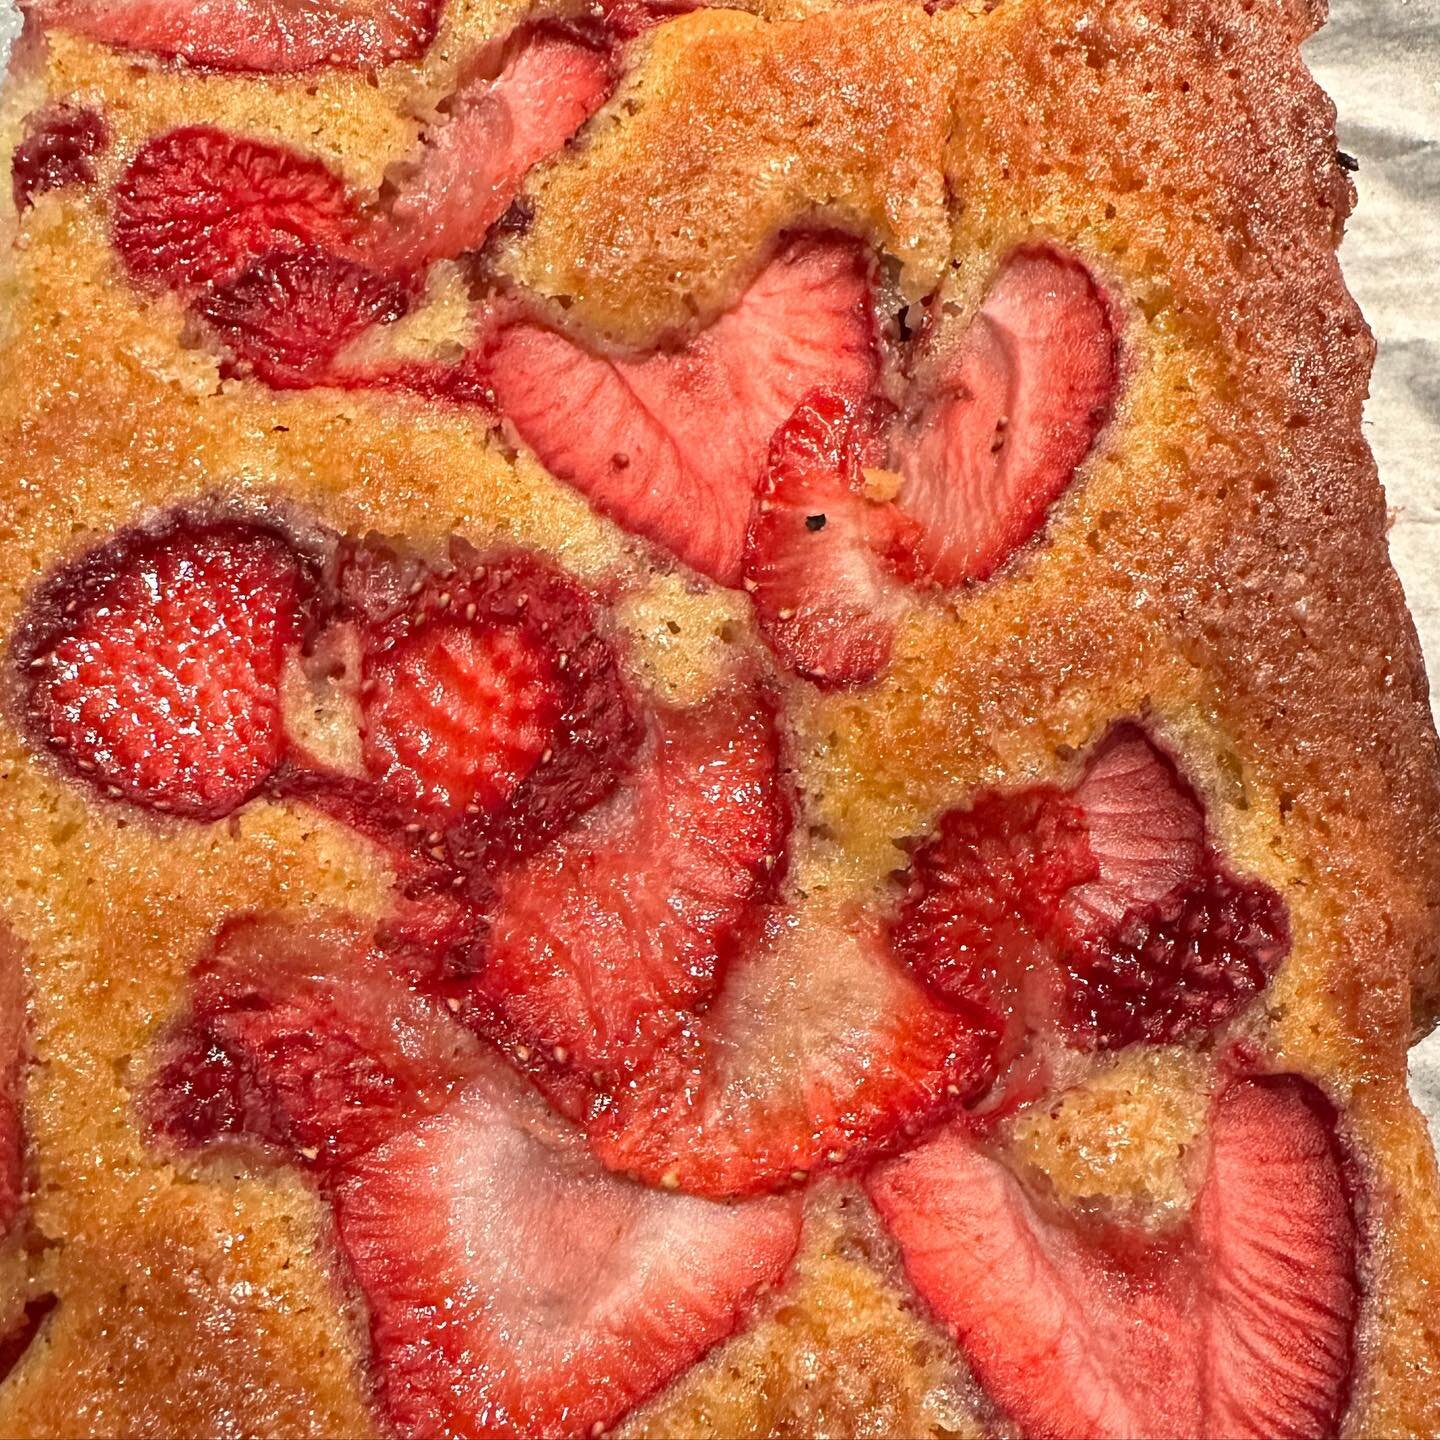 This is a great summer snack cake! It&rsquo;s made with both all purpose flour and wheat flour! The cardamom, lemon zest and Greek yogurt layered with strawberries makes a super moist and flavorful cake!
Contact me at www.elderberryprovisions.com or 